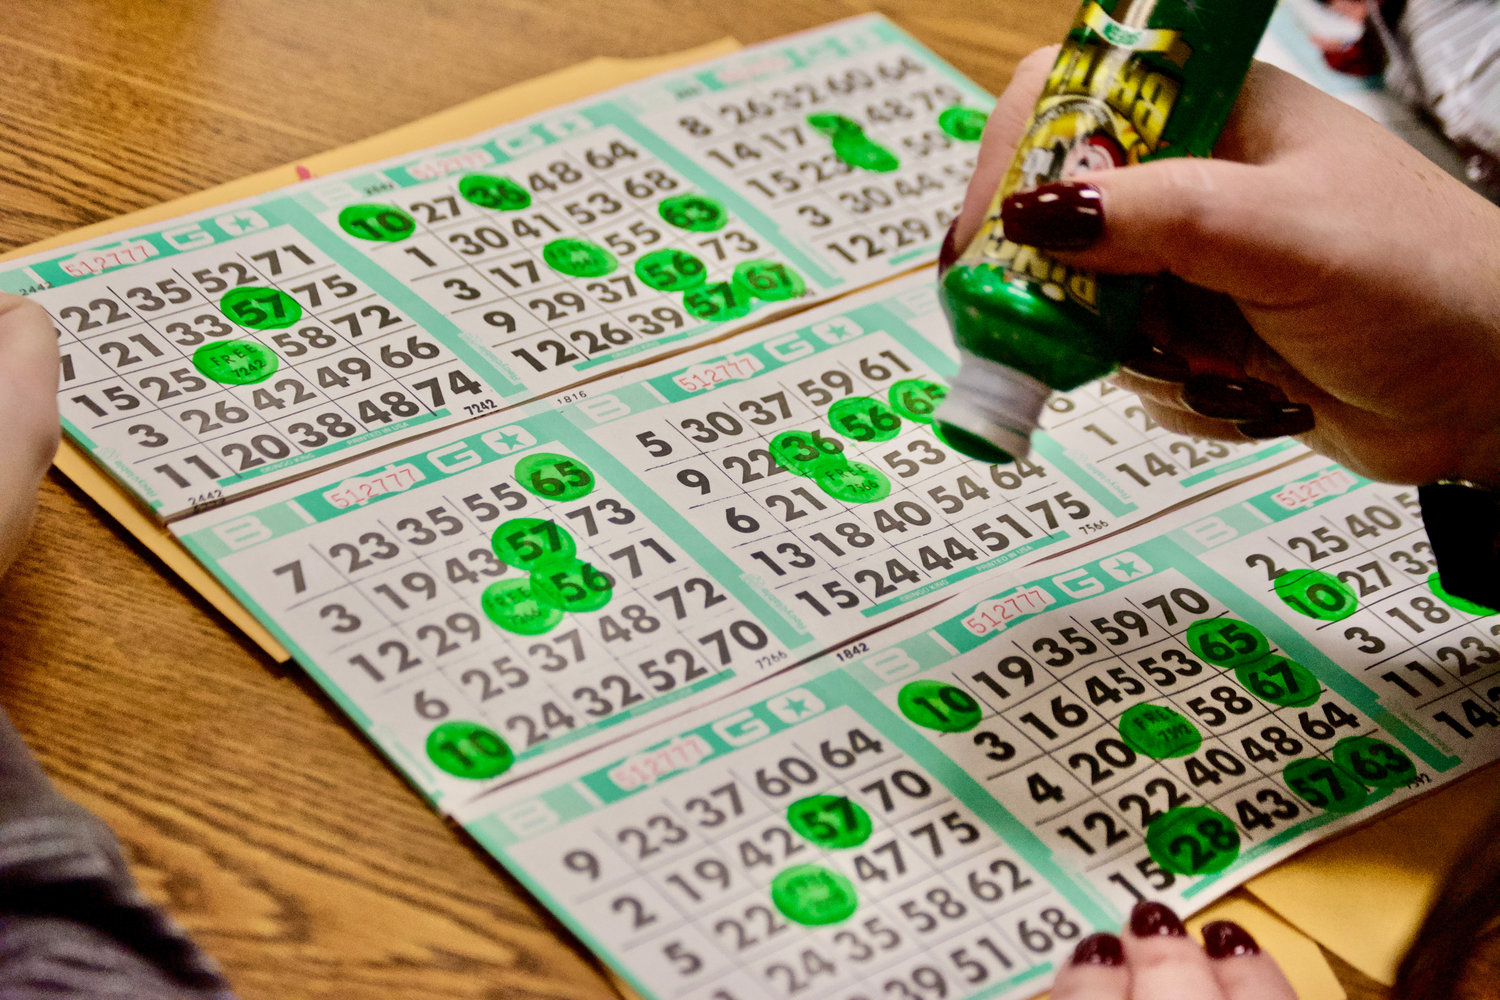 Bingo cards sold for $1 were marked by players Saturday night at the Chehalis Eagles event space. Proceeds went to the Twin Cities Rotary.